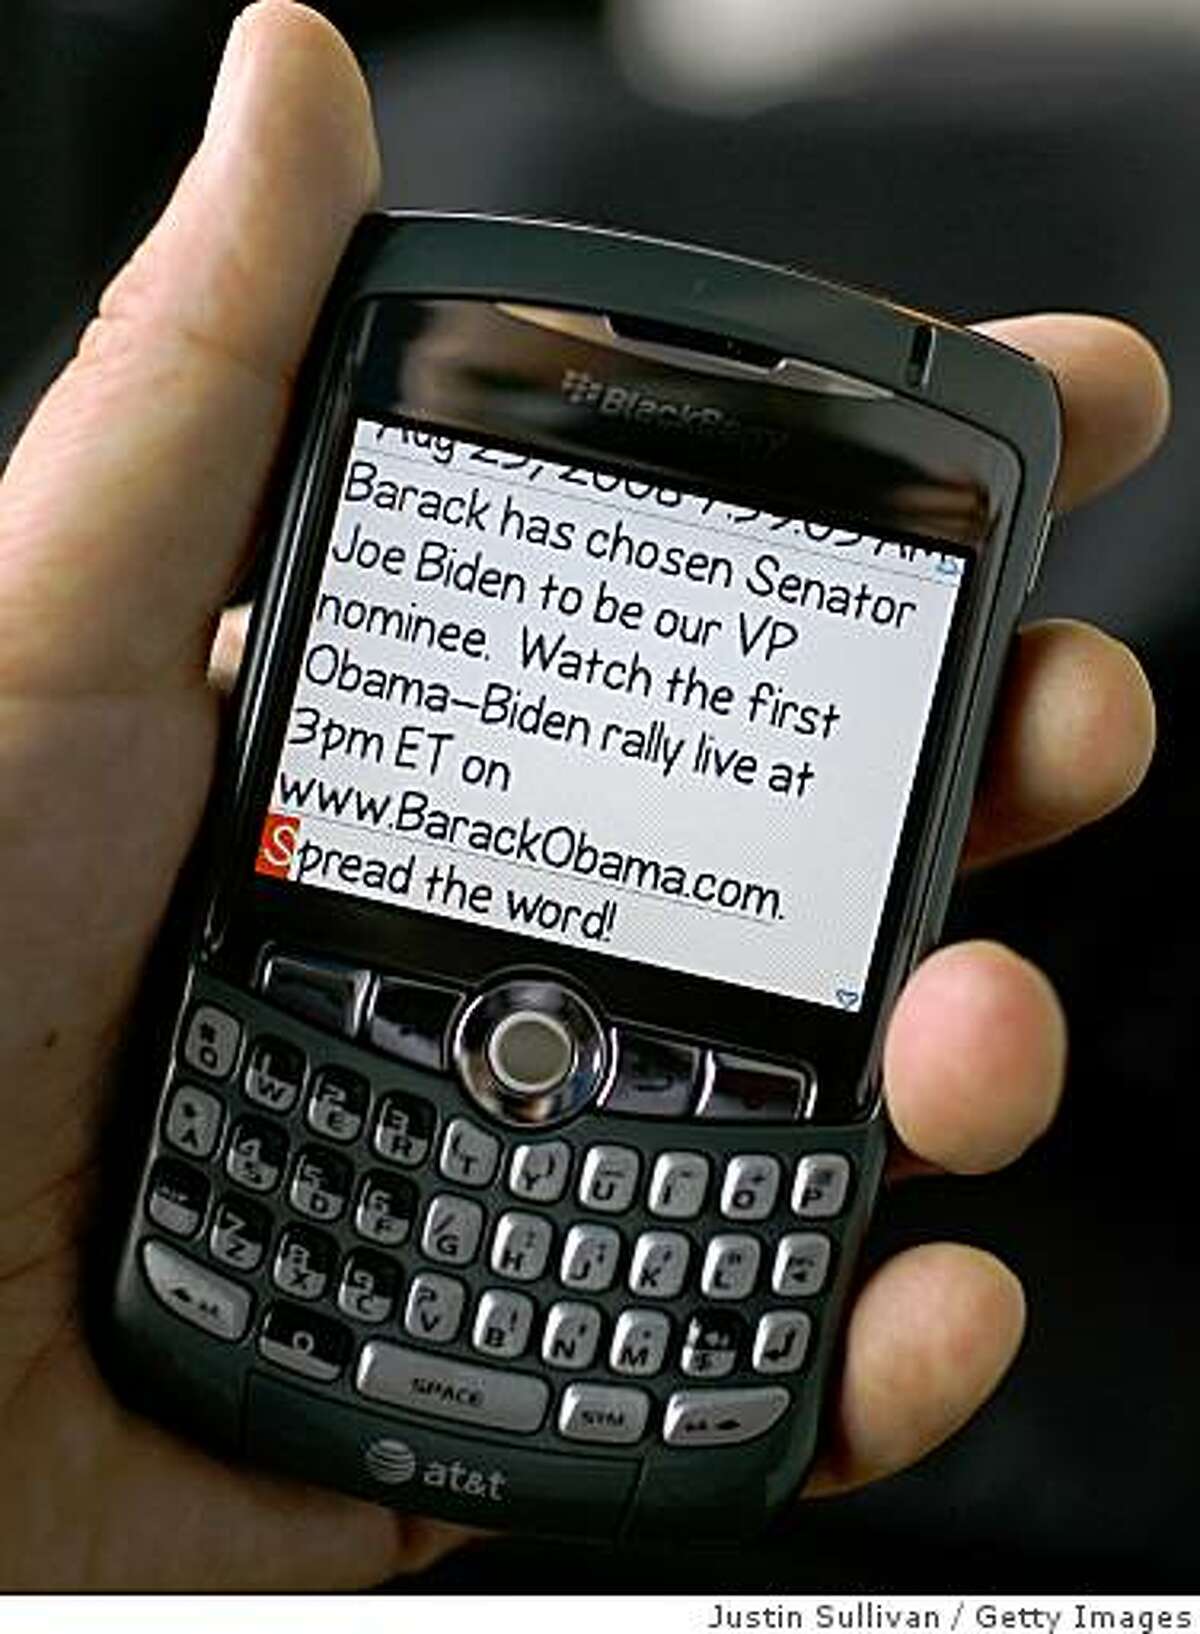 SAN ANSELMO, CA - AUGUST 23: In this photo illustration, a text message from the Barack Obama campaign on a cell phone announces U.S. Sen. Joe Biden (D-DE) as the Democratic Vice Presidential running mate August 23, 2008 in San Anselmo, California. Presumpitve Democratic Presidential nominee U.S. Sen. Barack Obama (D-IL) notified supporters of his choice for VP via text message early Saturday morning. (Photo Illustration by Justin Sullivan/Getty Images)